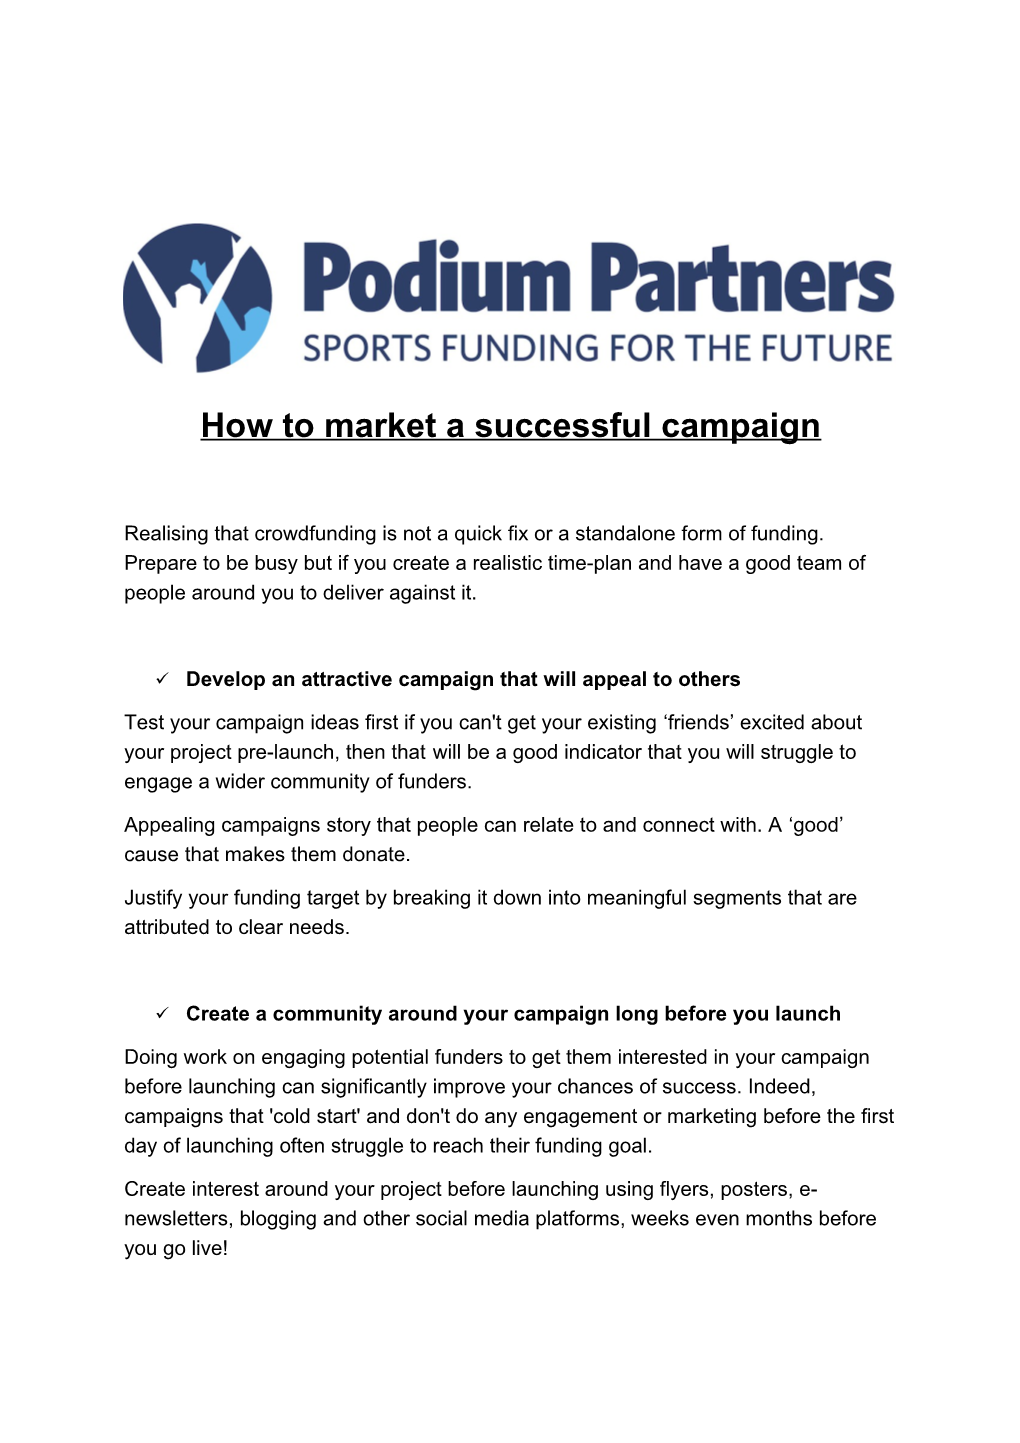 How to Market a Successful Campaign